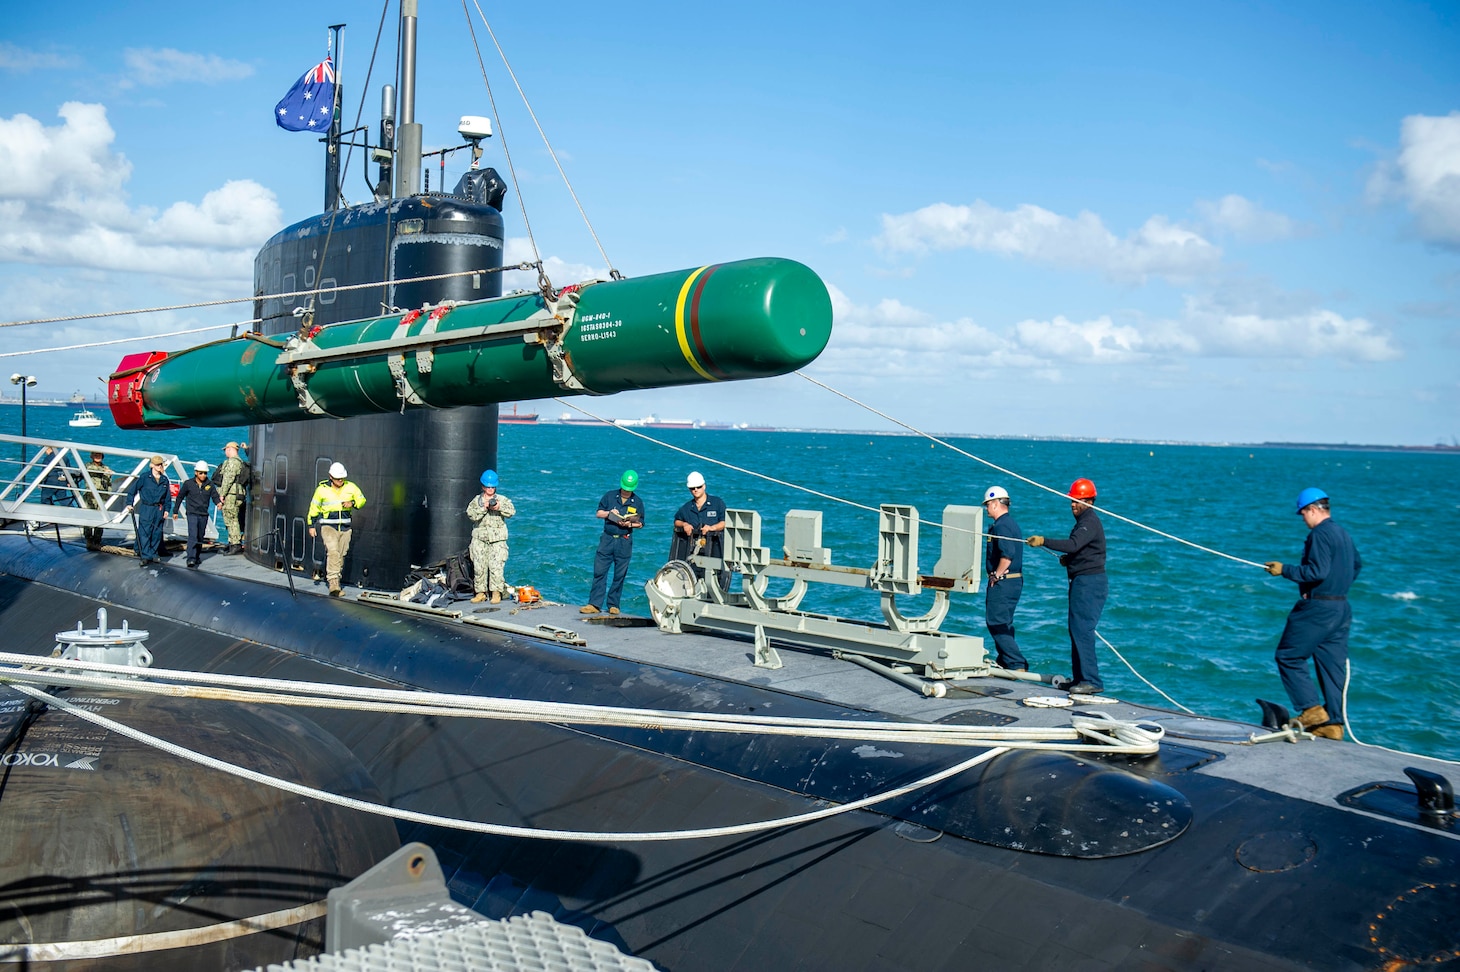 PERTH, Australia (April 28, 2022) – Sailors assigned to the Los Angeles-class fast-attack submarine USS Springfield (SSN 761), participate in a weapons handling exercise with a Harpoon inert training shape while the submarine is pierside at Royal Australian Navy base HMAS Stirling on Garden Island off the coast of Perth, Australia, April 28, 2022. Springfield is currently on patrol in support of national security in the U.S. 7th Fleet area of operations. (U.S. Navy photo by Mass Communication Specialist Seaman Wendy Arauz)